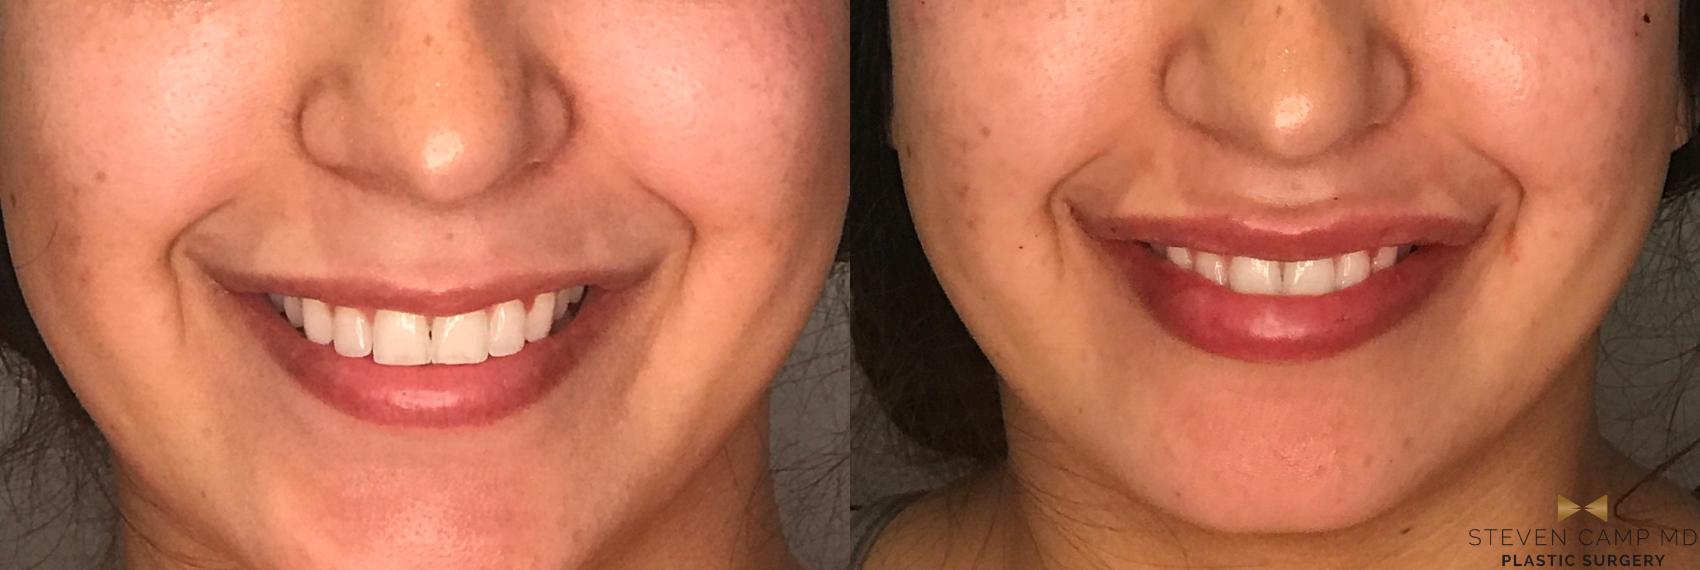 Dermal Fillers Before & After Photo | Fort Worth, Texas | Steven Camp MD Plastic Surgery